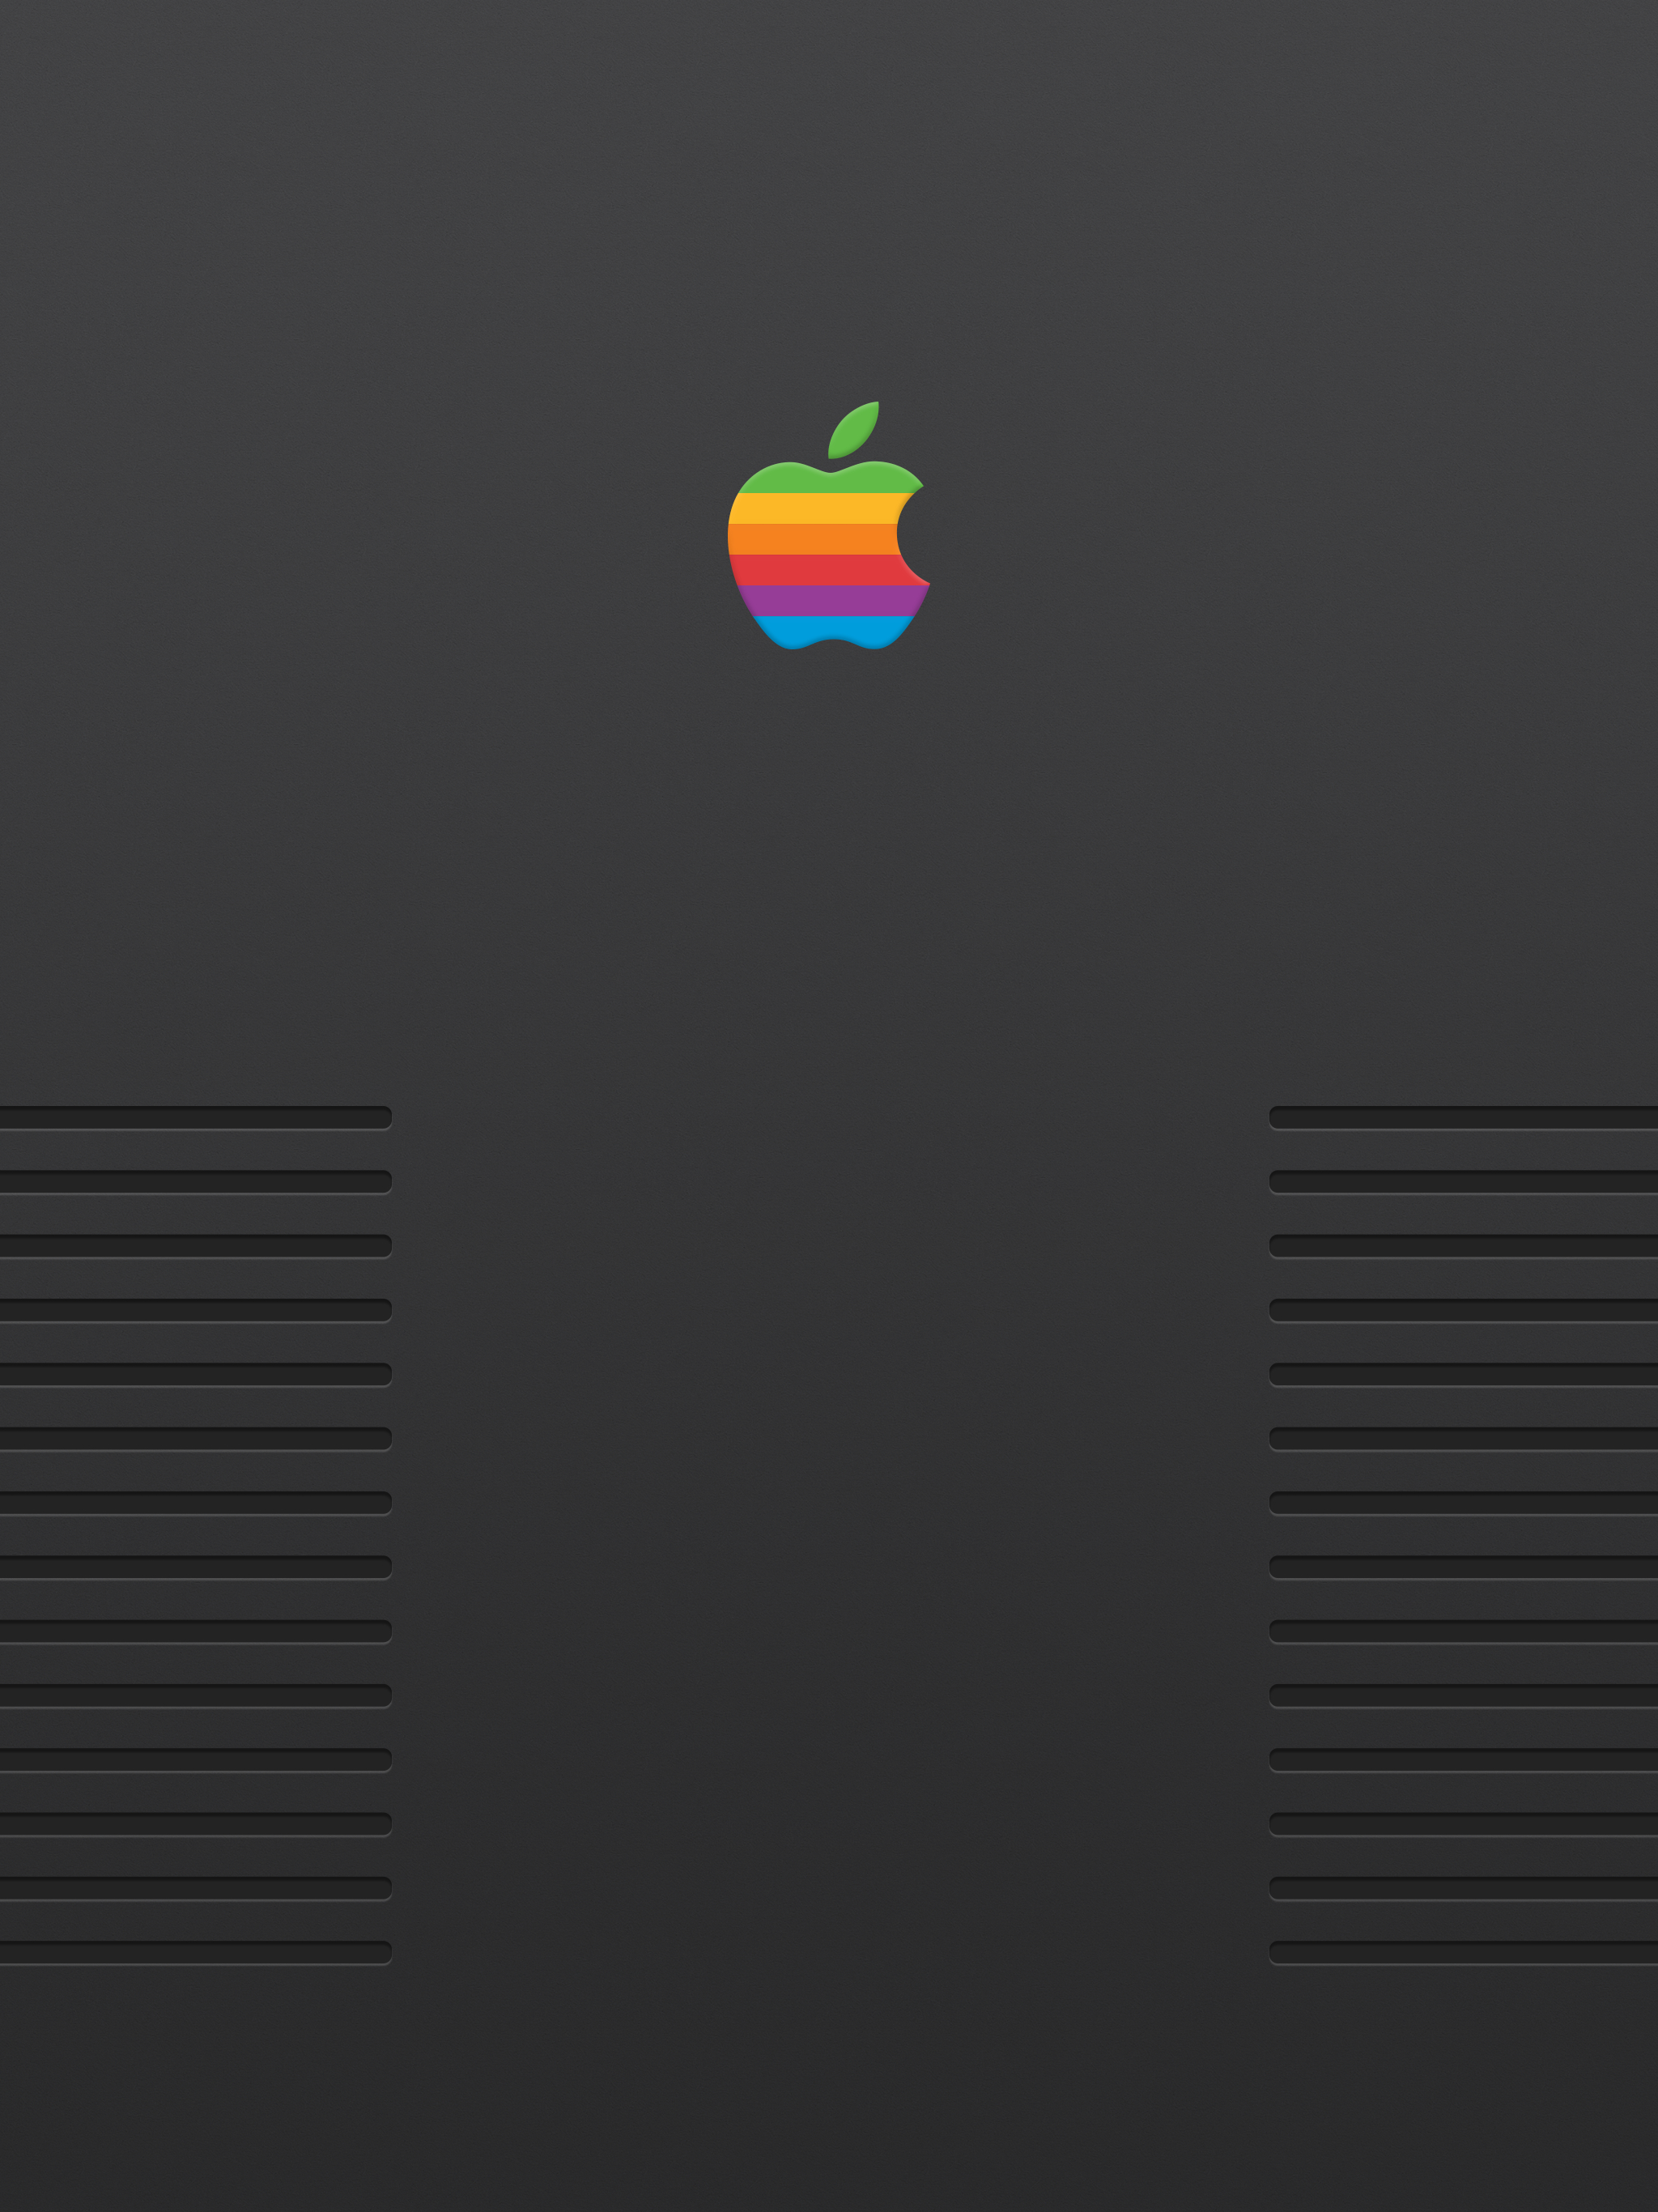 Wallpaper Weekends Retro Apple For iPhone iPad Mac And